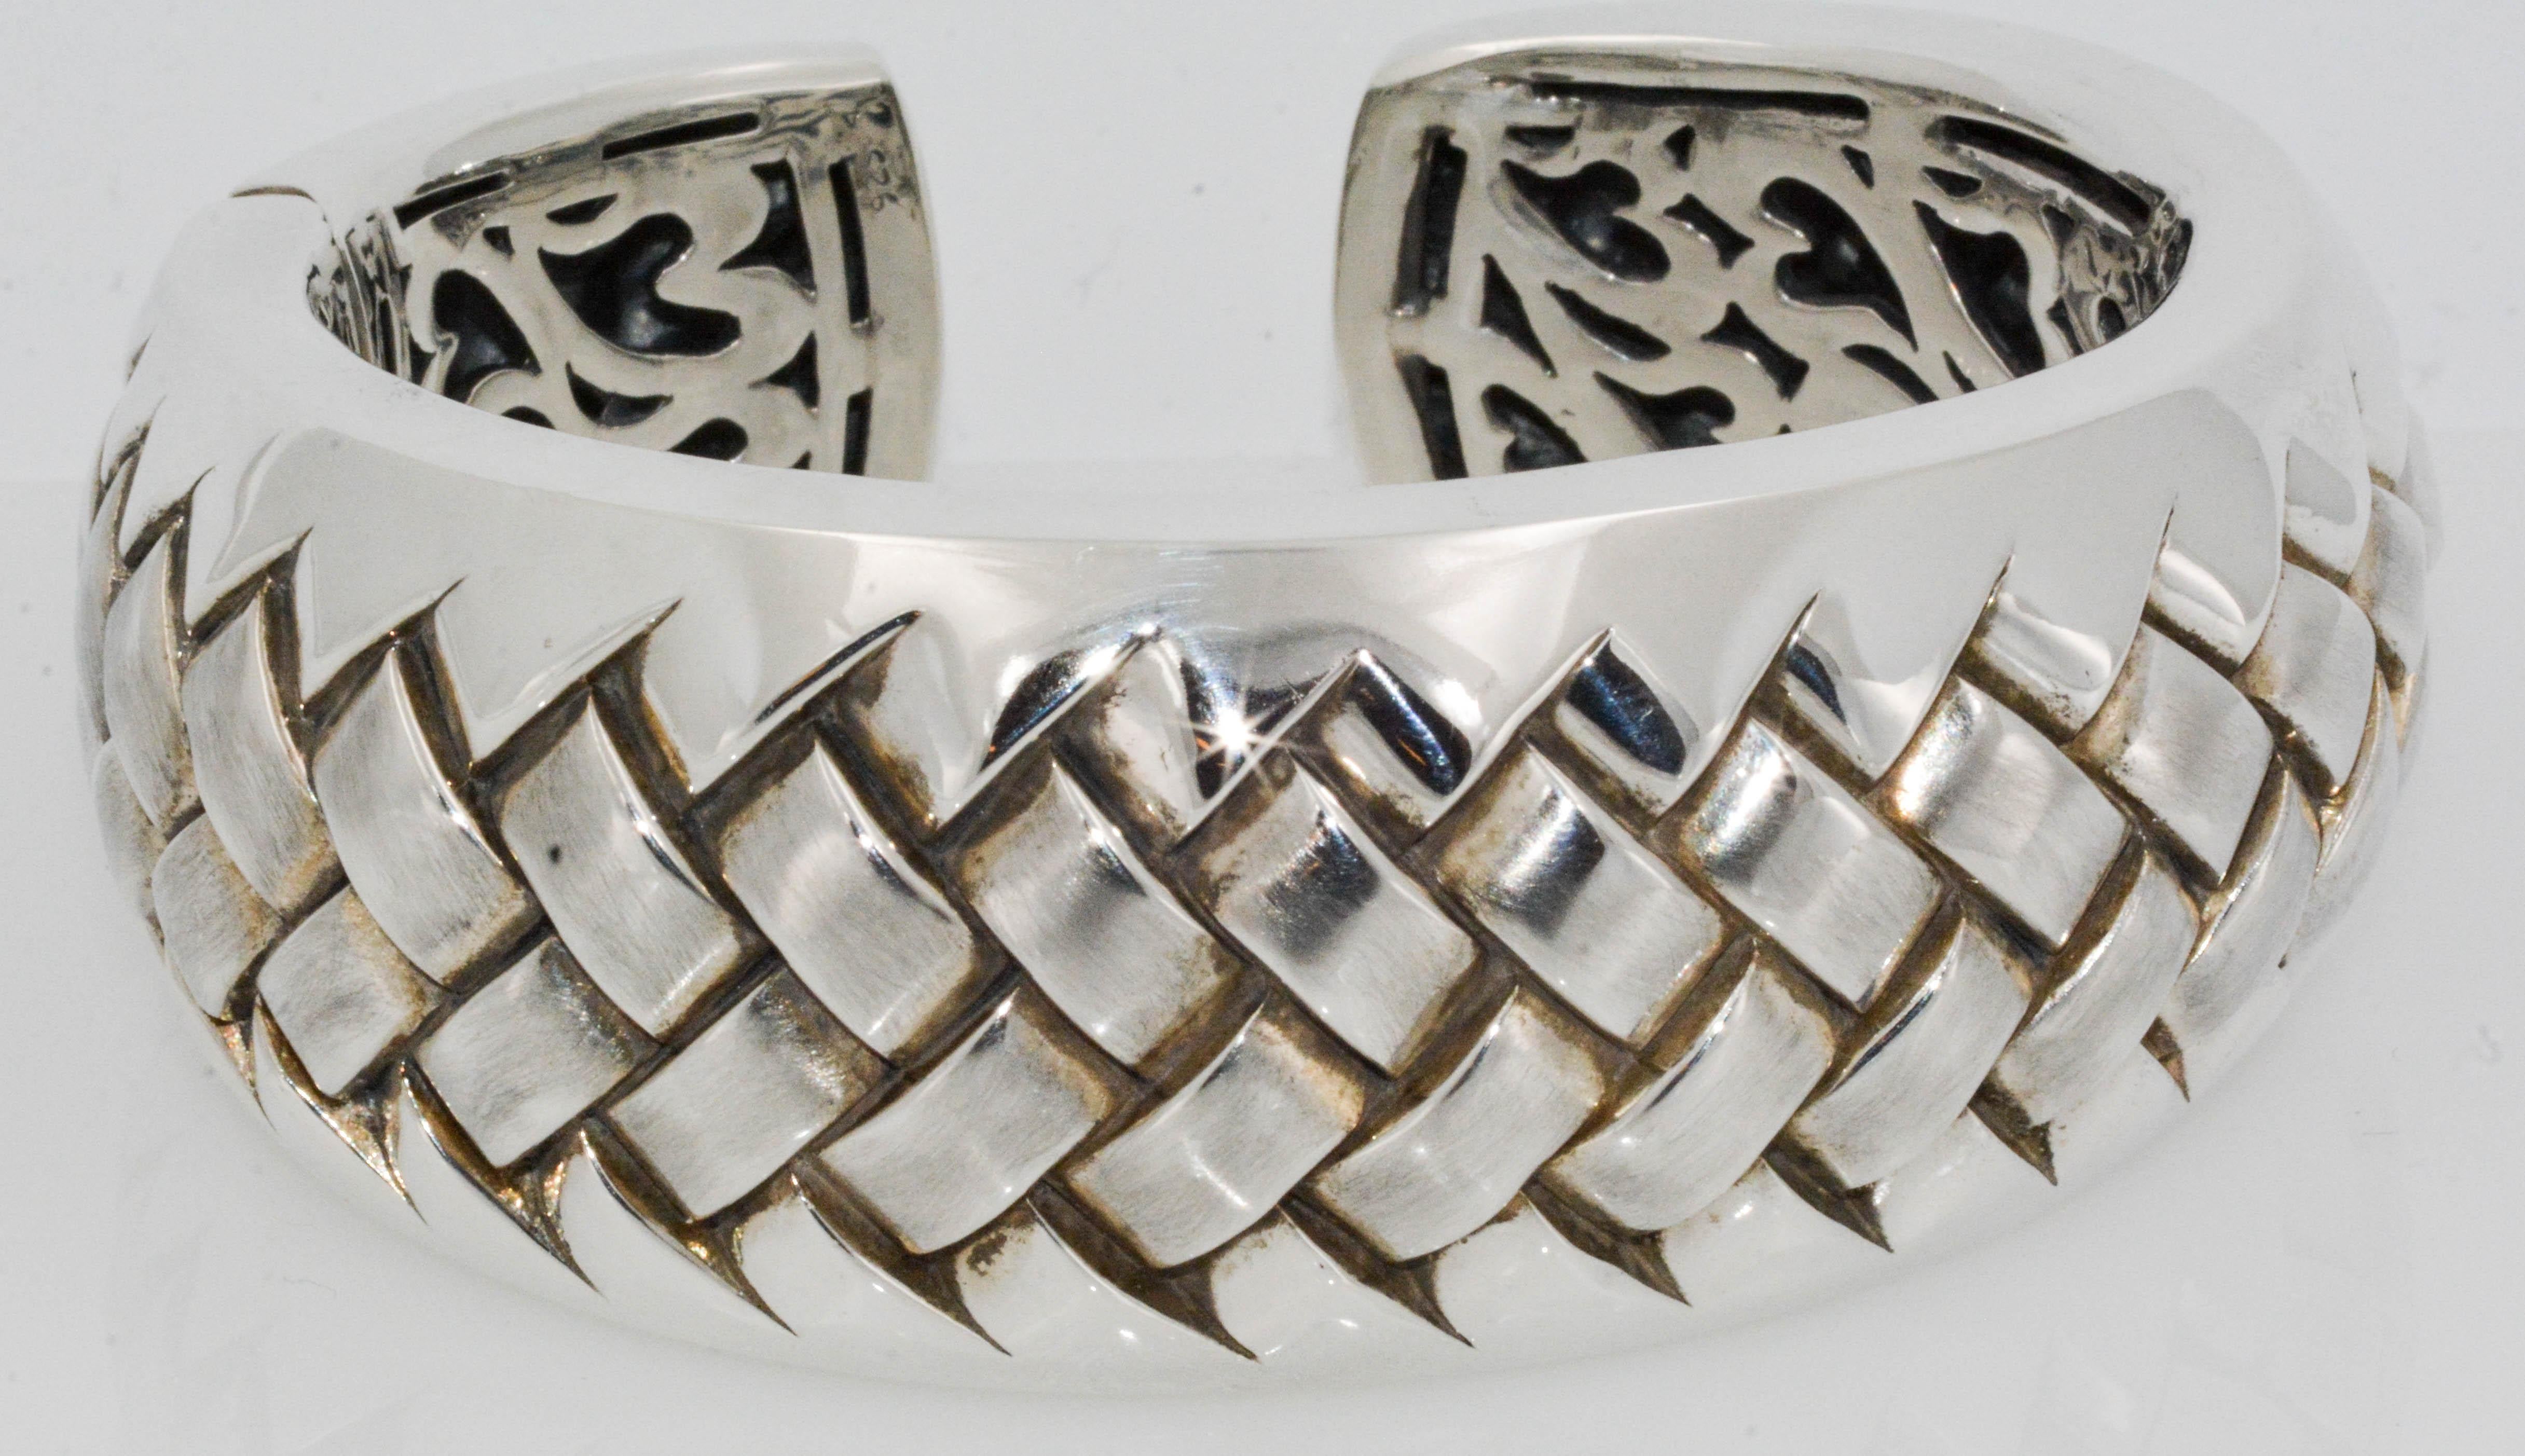 An appealing Sterling Silver Scott Kay cuff bracelet with his signature stamp on the underside. This superb cuff bracelet has a comfortable latch opening that is very discreet.  This cuff bracelet is remarkable with its woven texture and design as